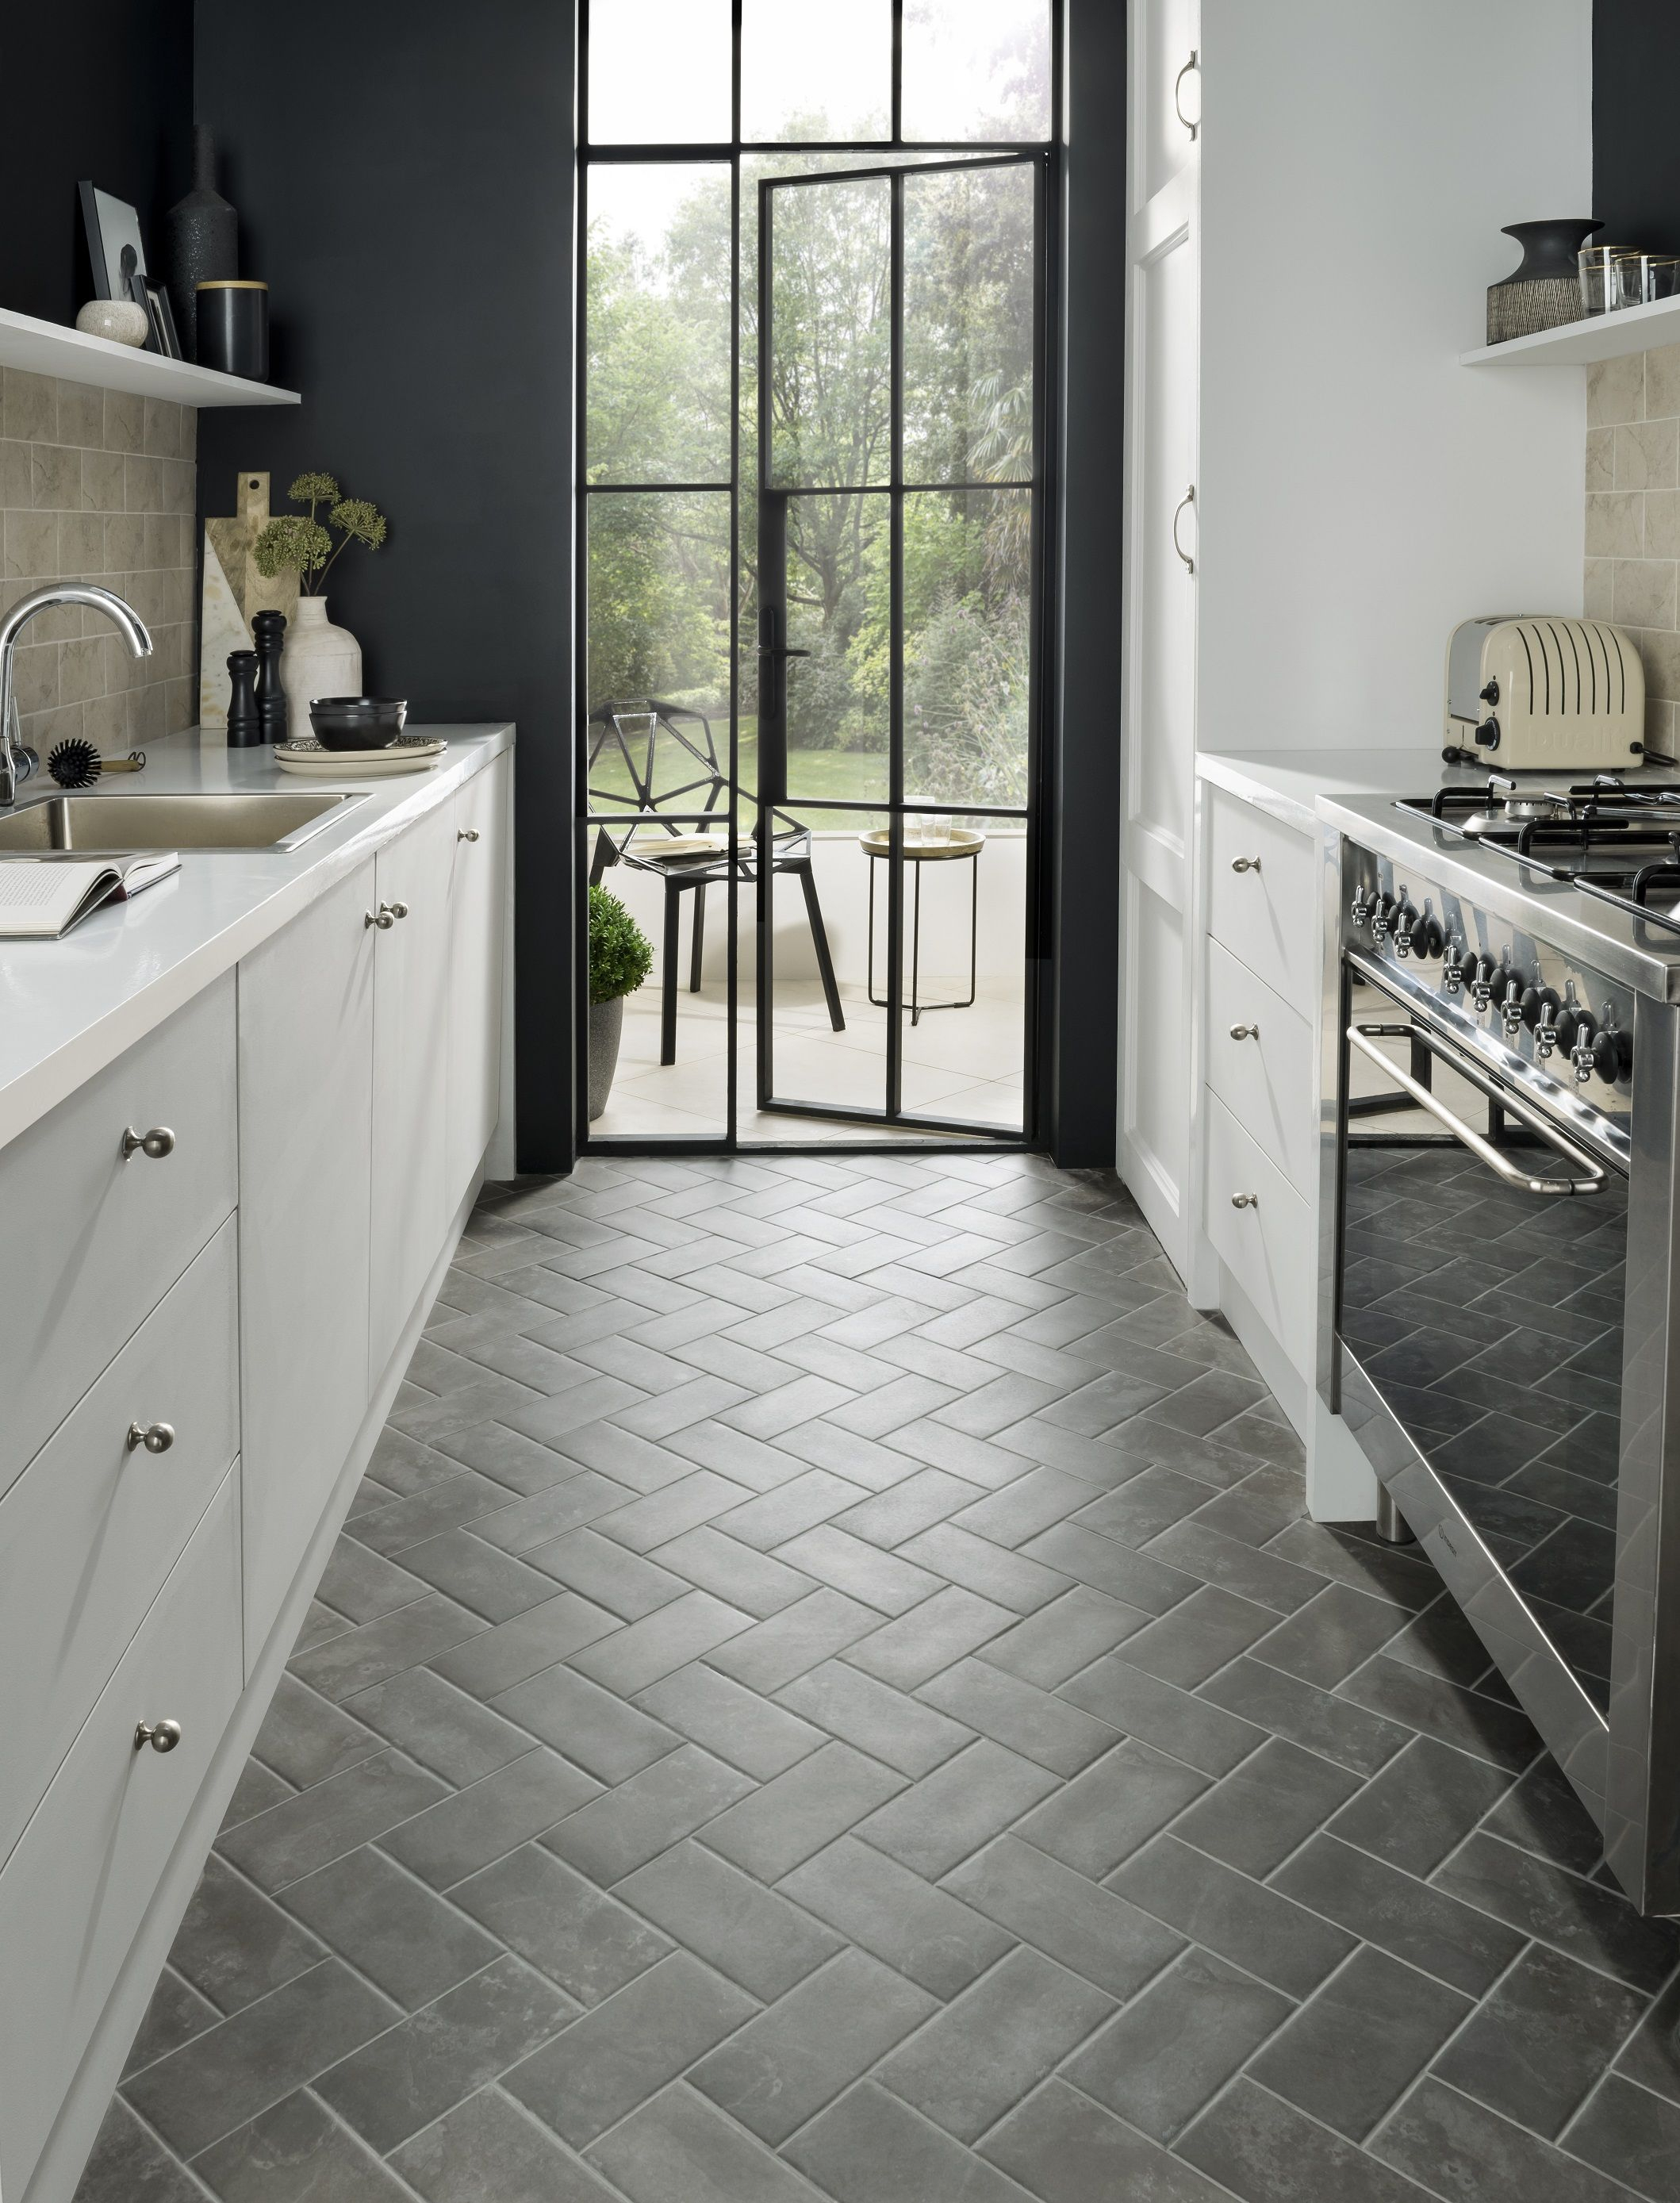 11 Tile Design Ideas To Make A Small Kitchen Feel Bigger with size 2118 X 2777